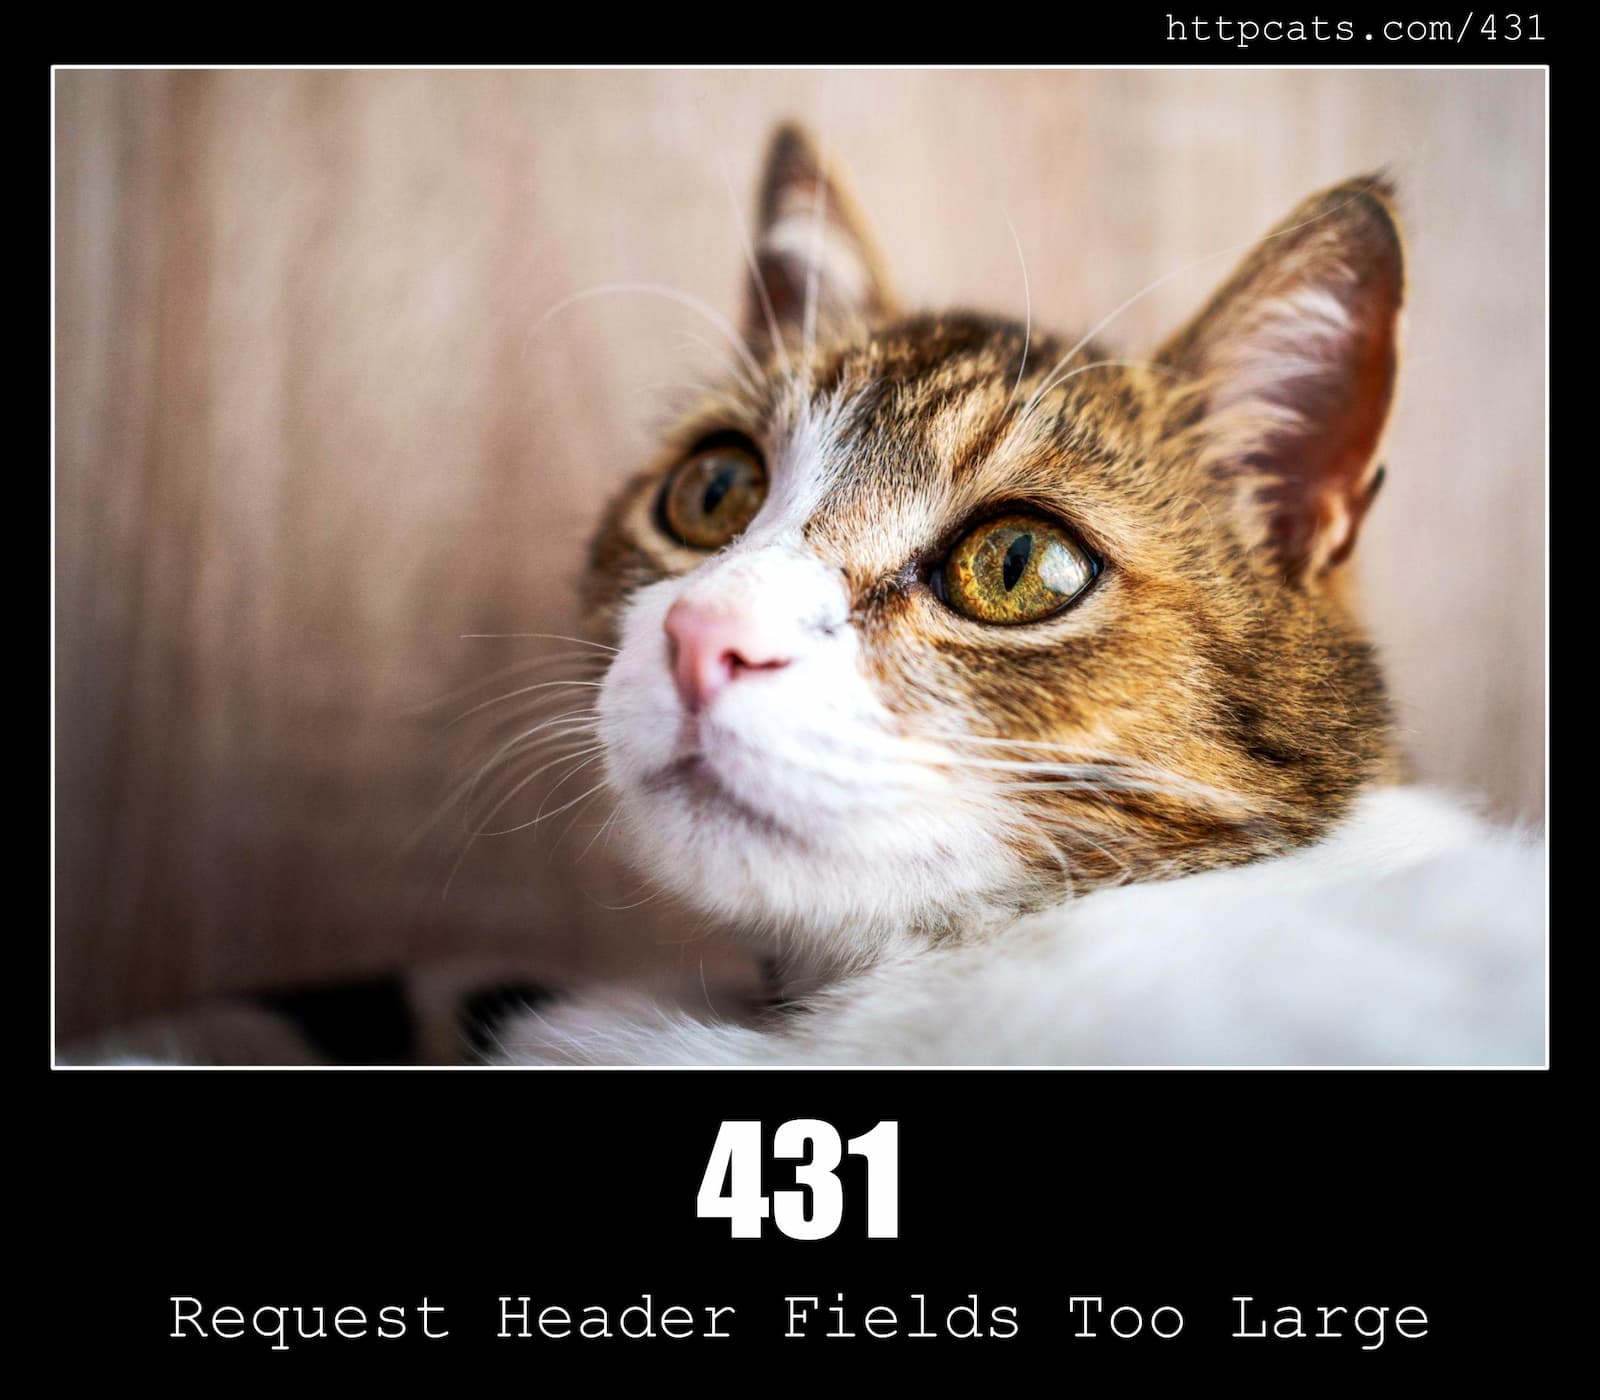 HTTP Status Code 431 Request Header Fields Too Large & Cats